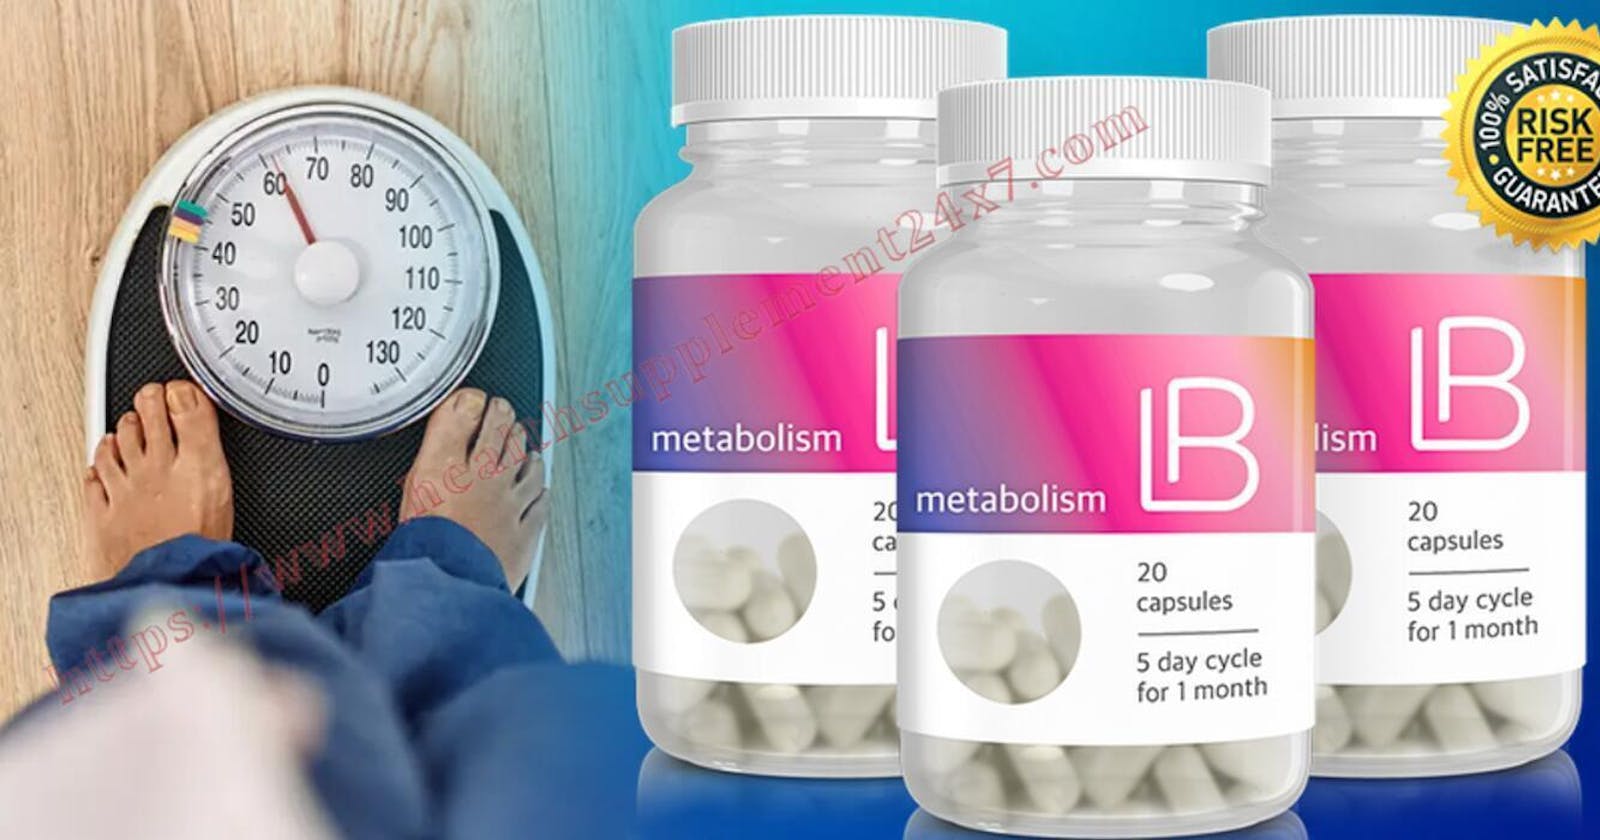 Liba Weight Loss Capsules UK Reviews Healthy Fat Burning, Increase Metabolism And Maintain Overall Body(REAL OR HOAX)